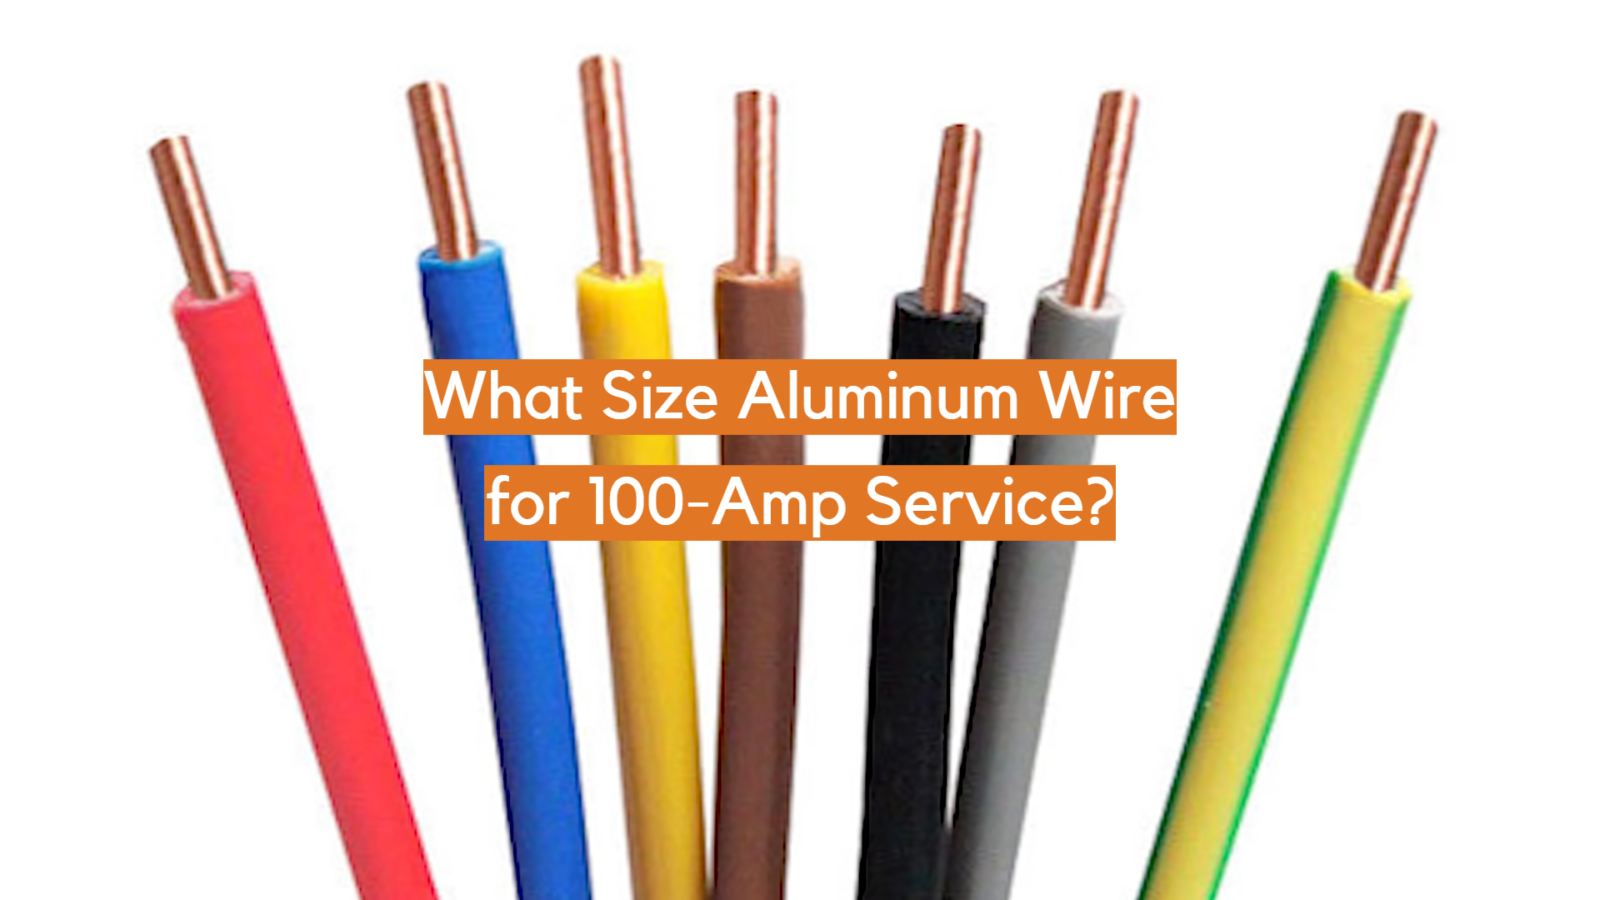 What Size Aluminum Wire for 100-Amp Service?